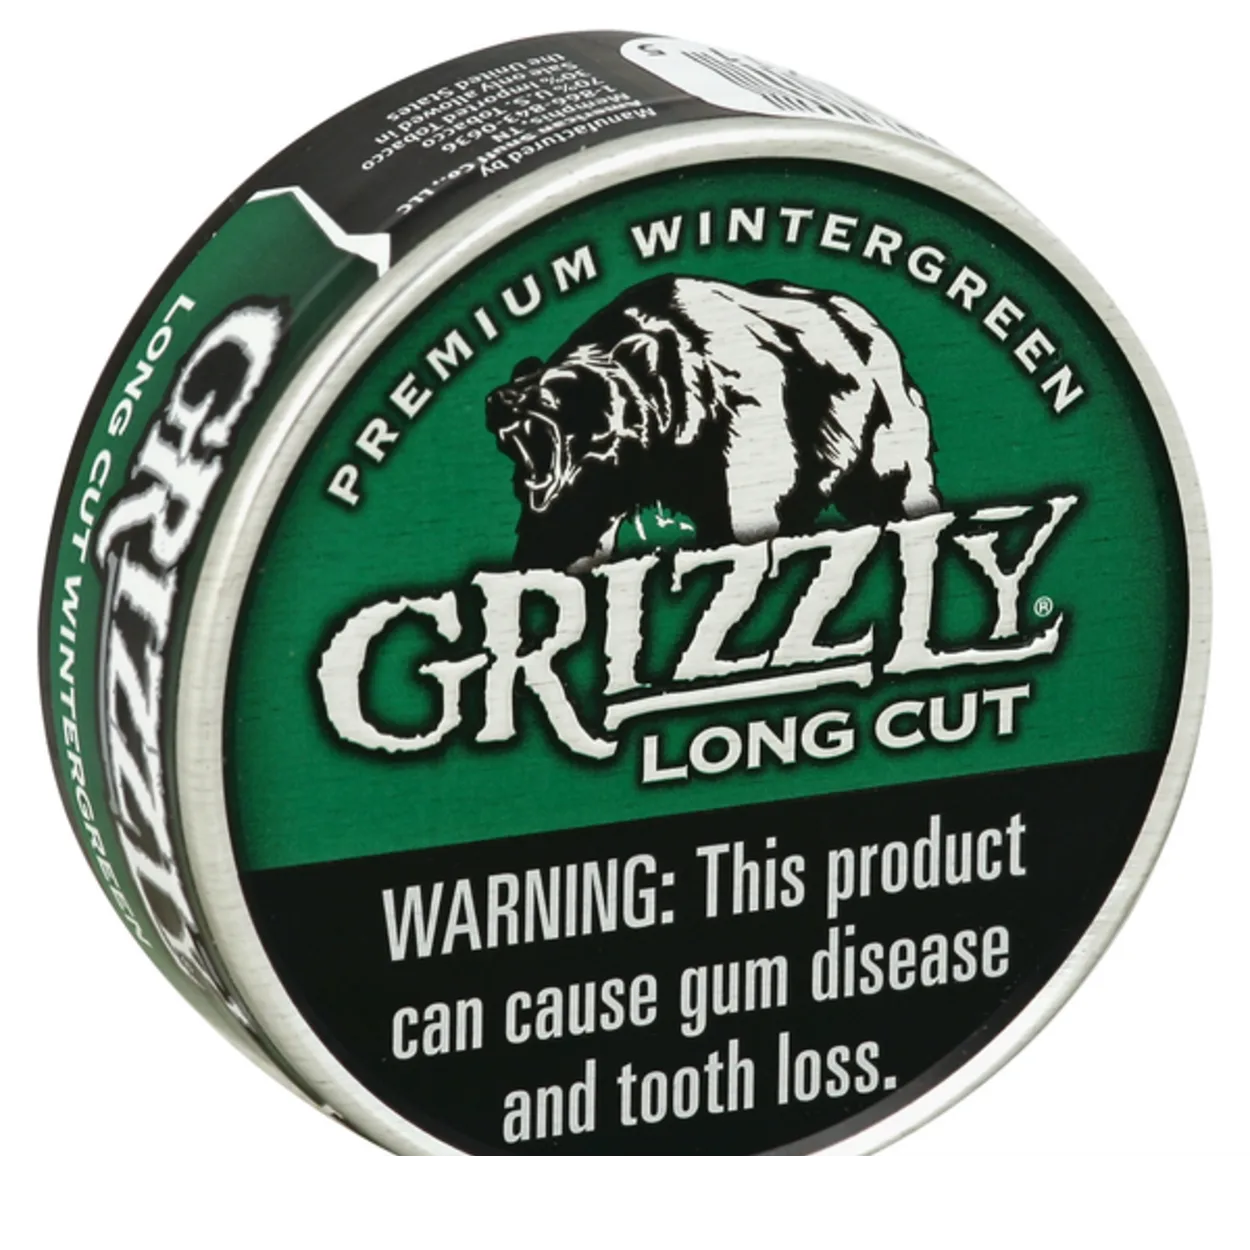 Grizzly Tobacco.